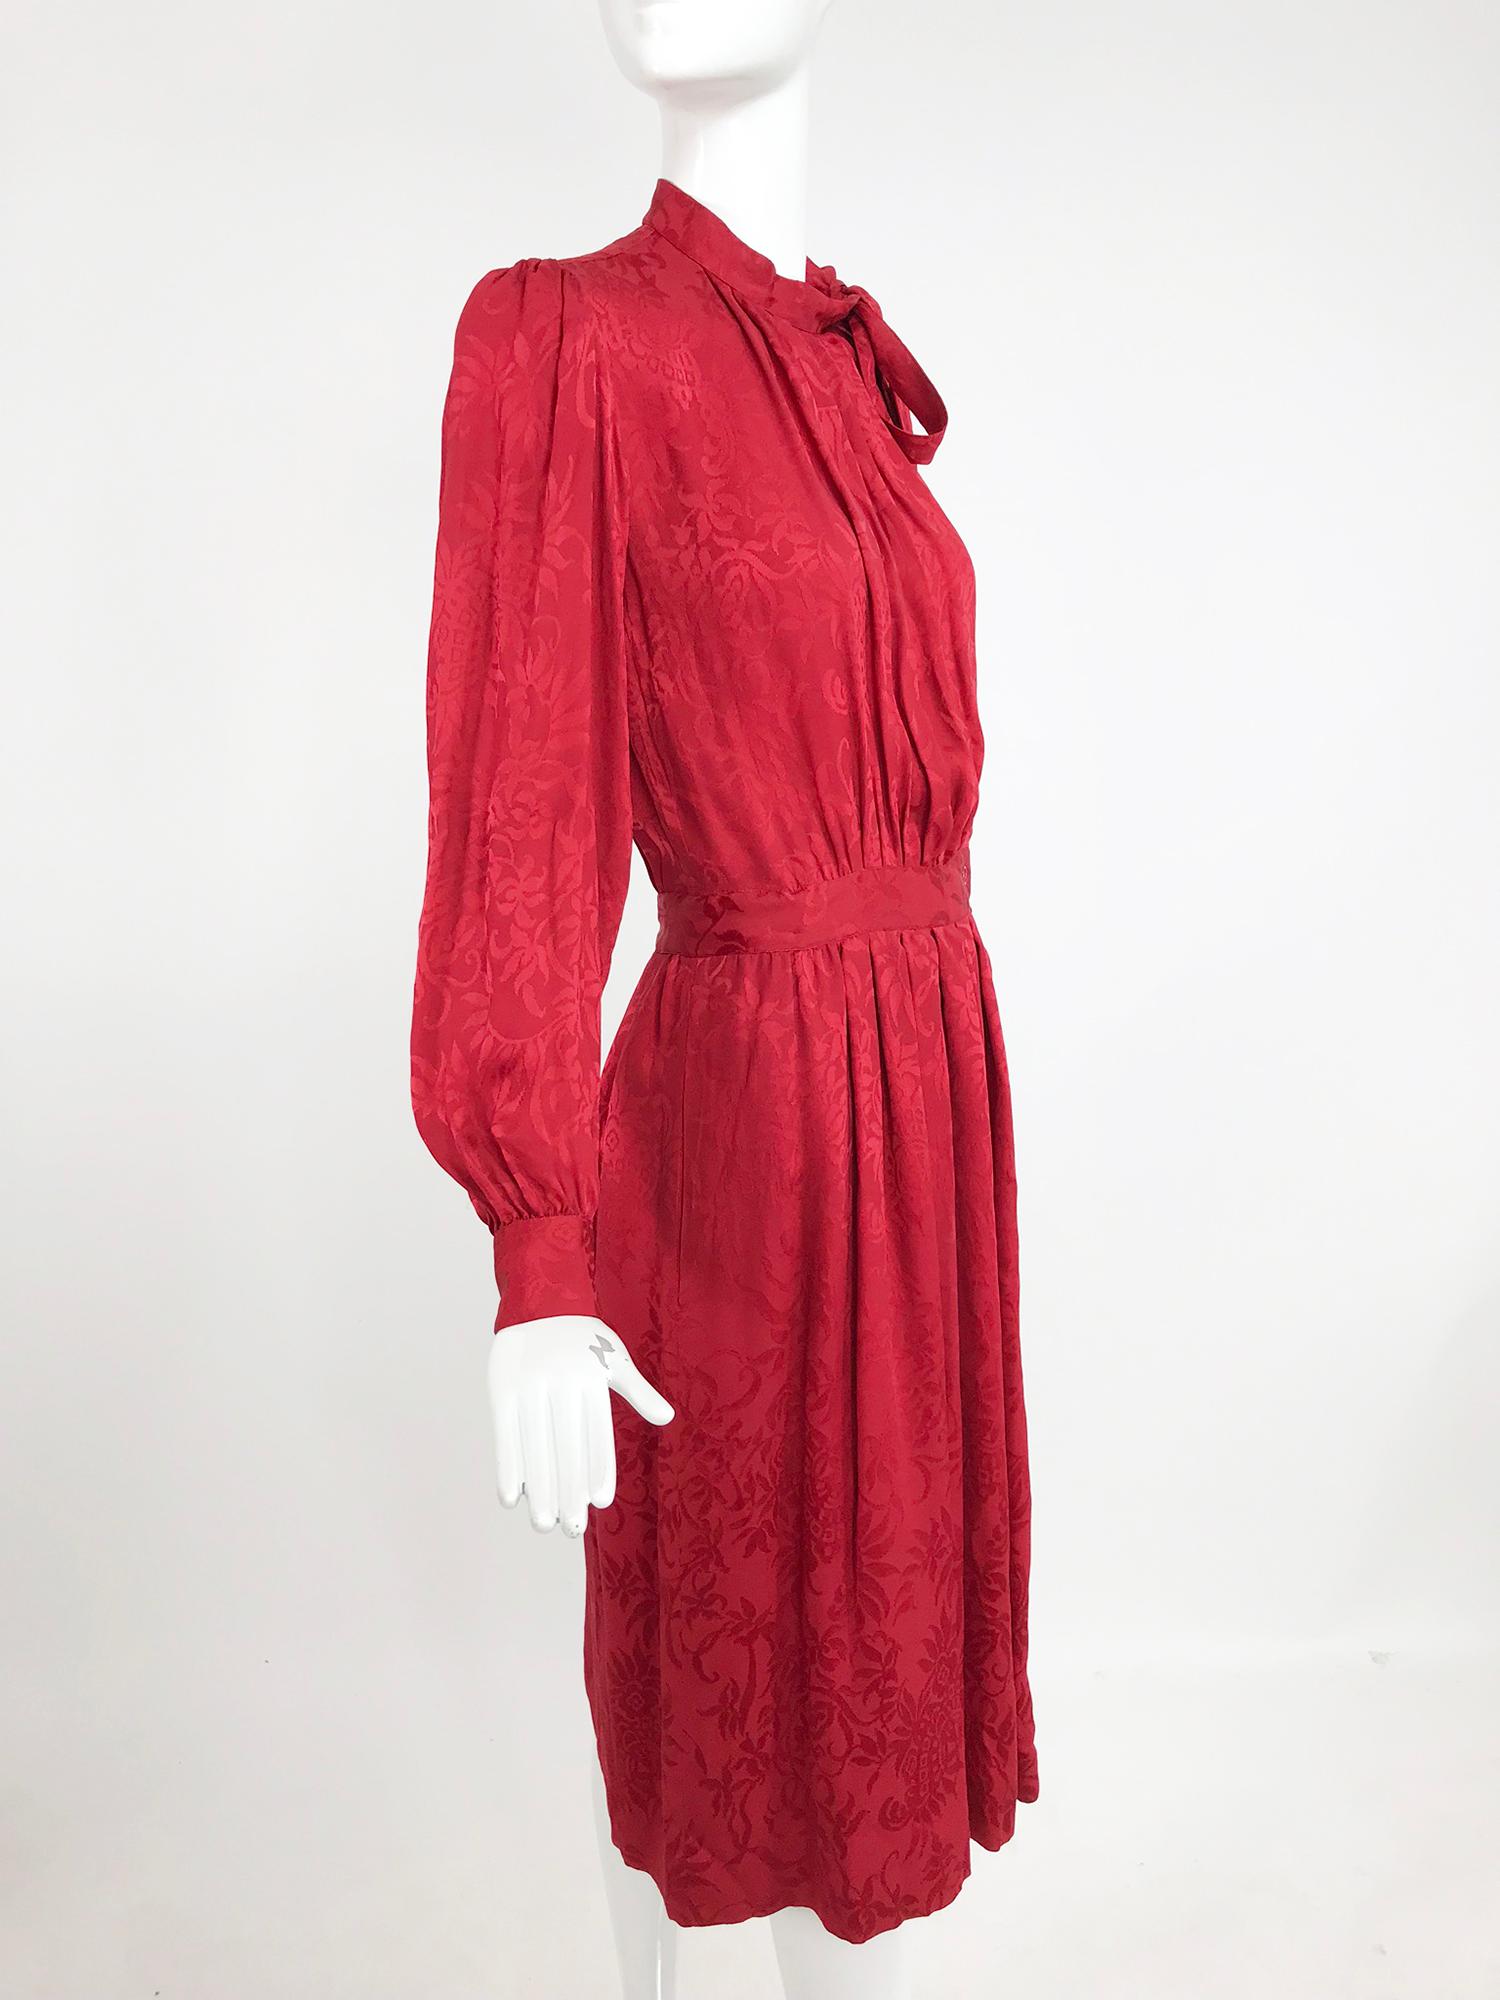 Yves Saint Laurent Red Silk Jacquard Bow Tie Dress 1970s In Good Condition In West Palm Beach, FL